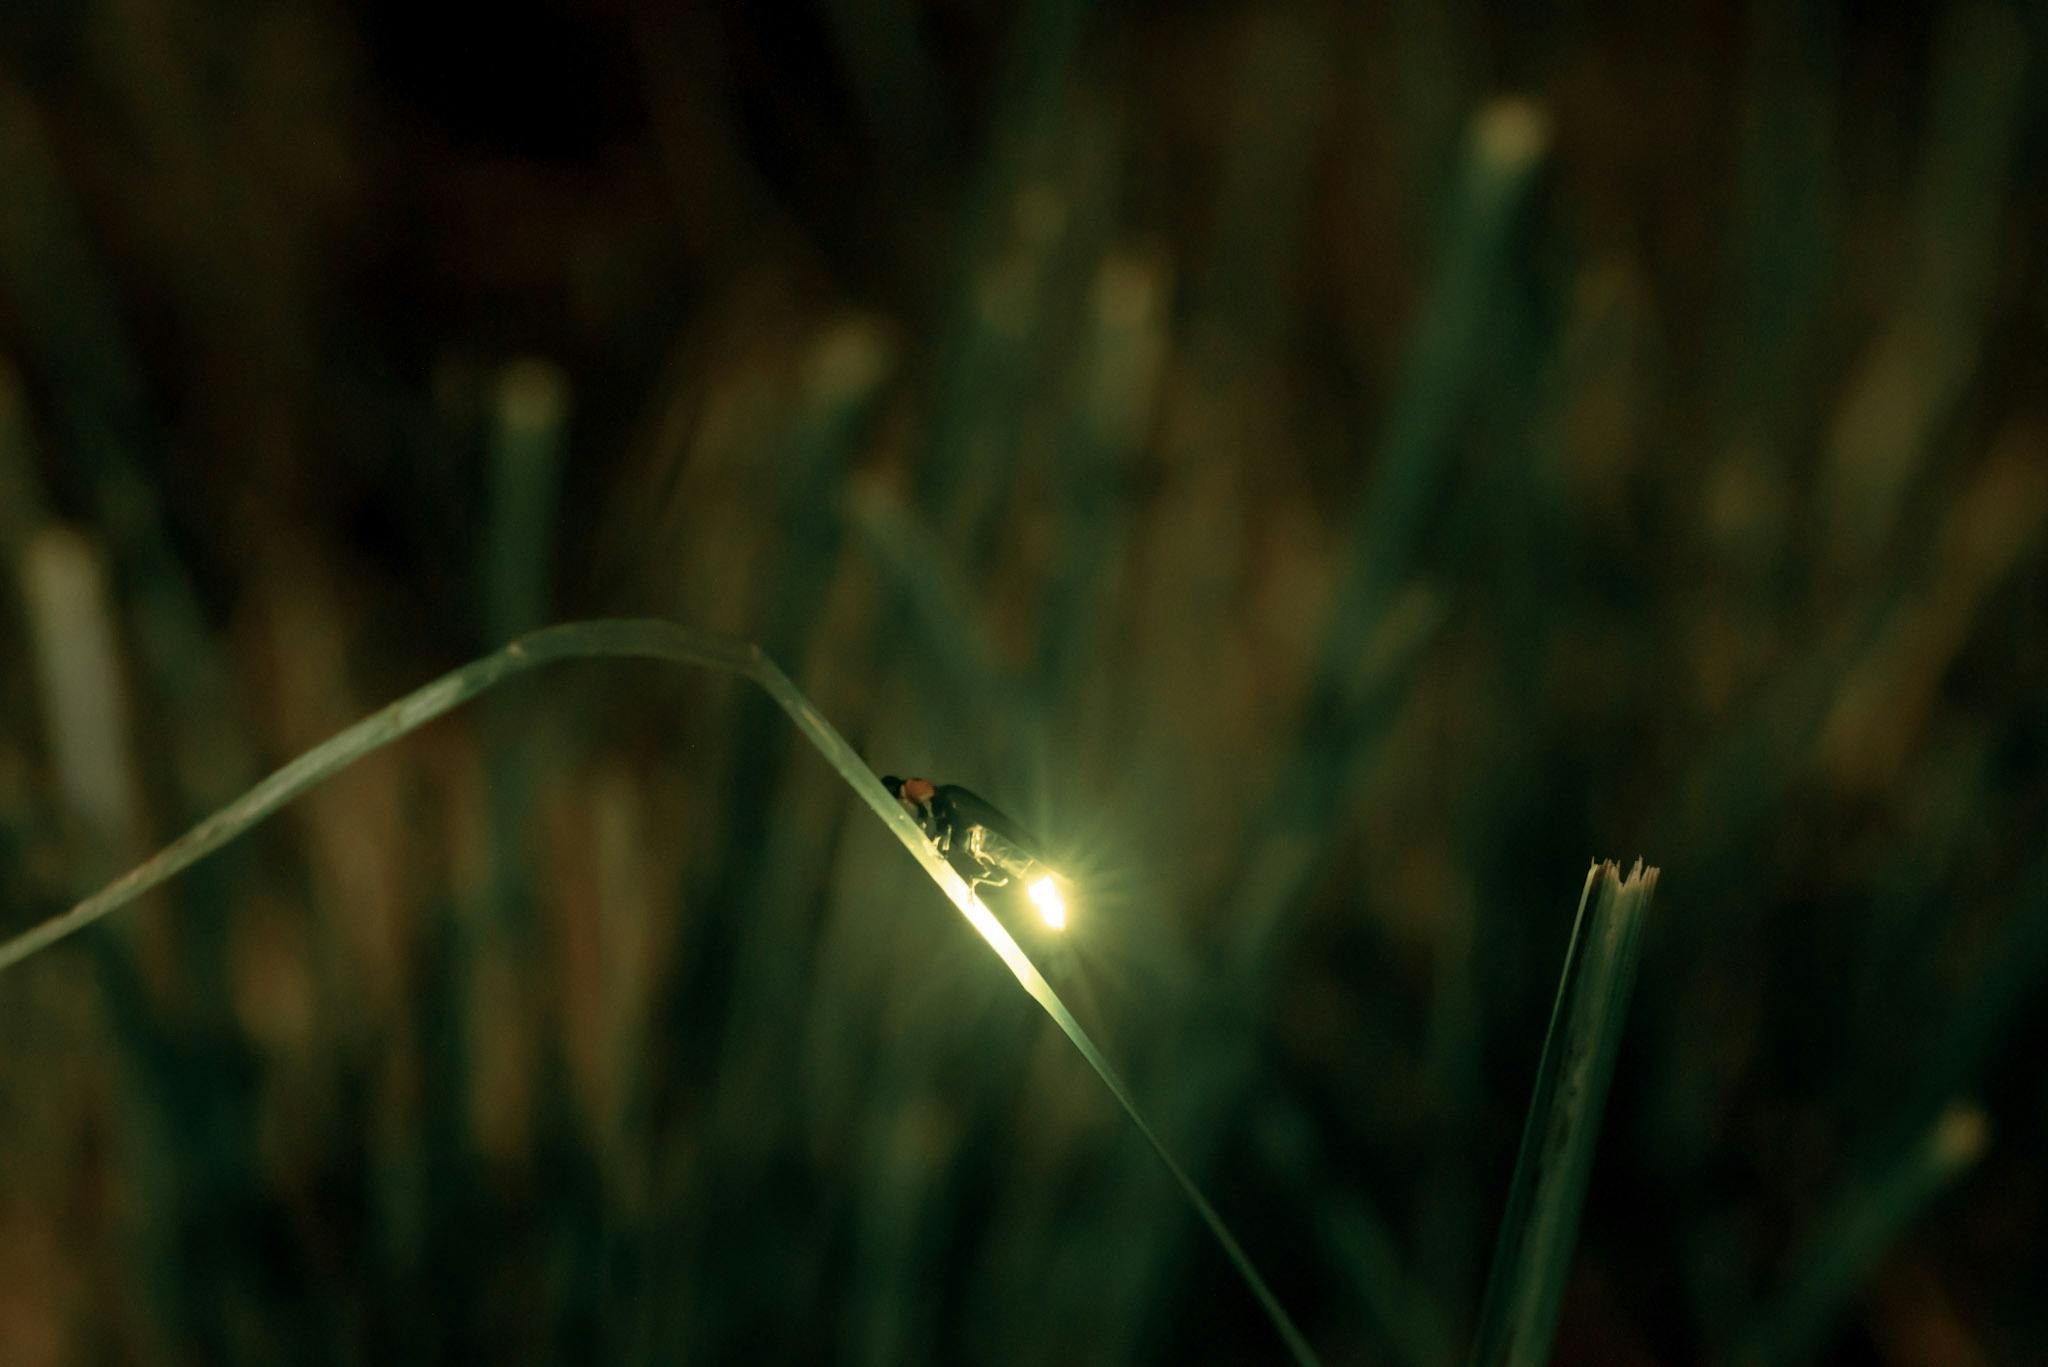 Fireflies are simply magical